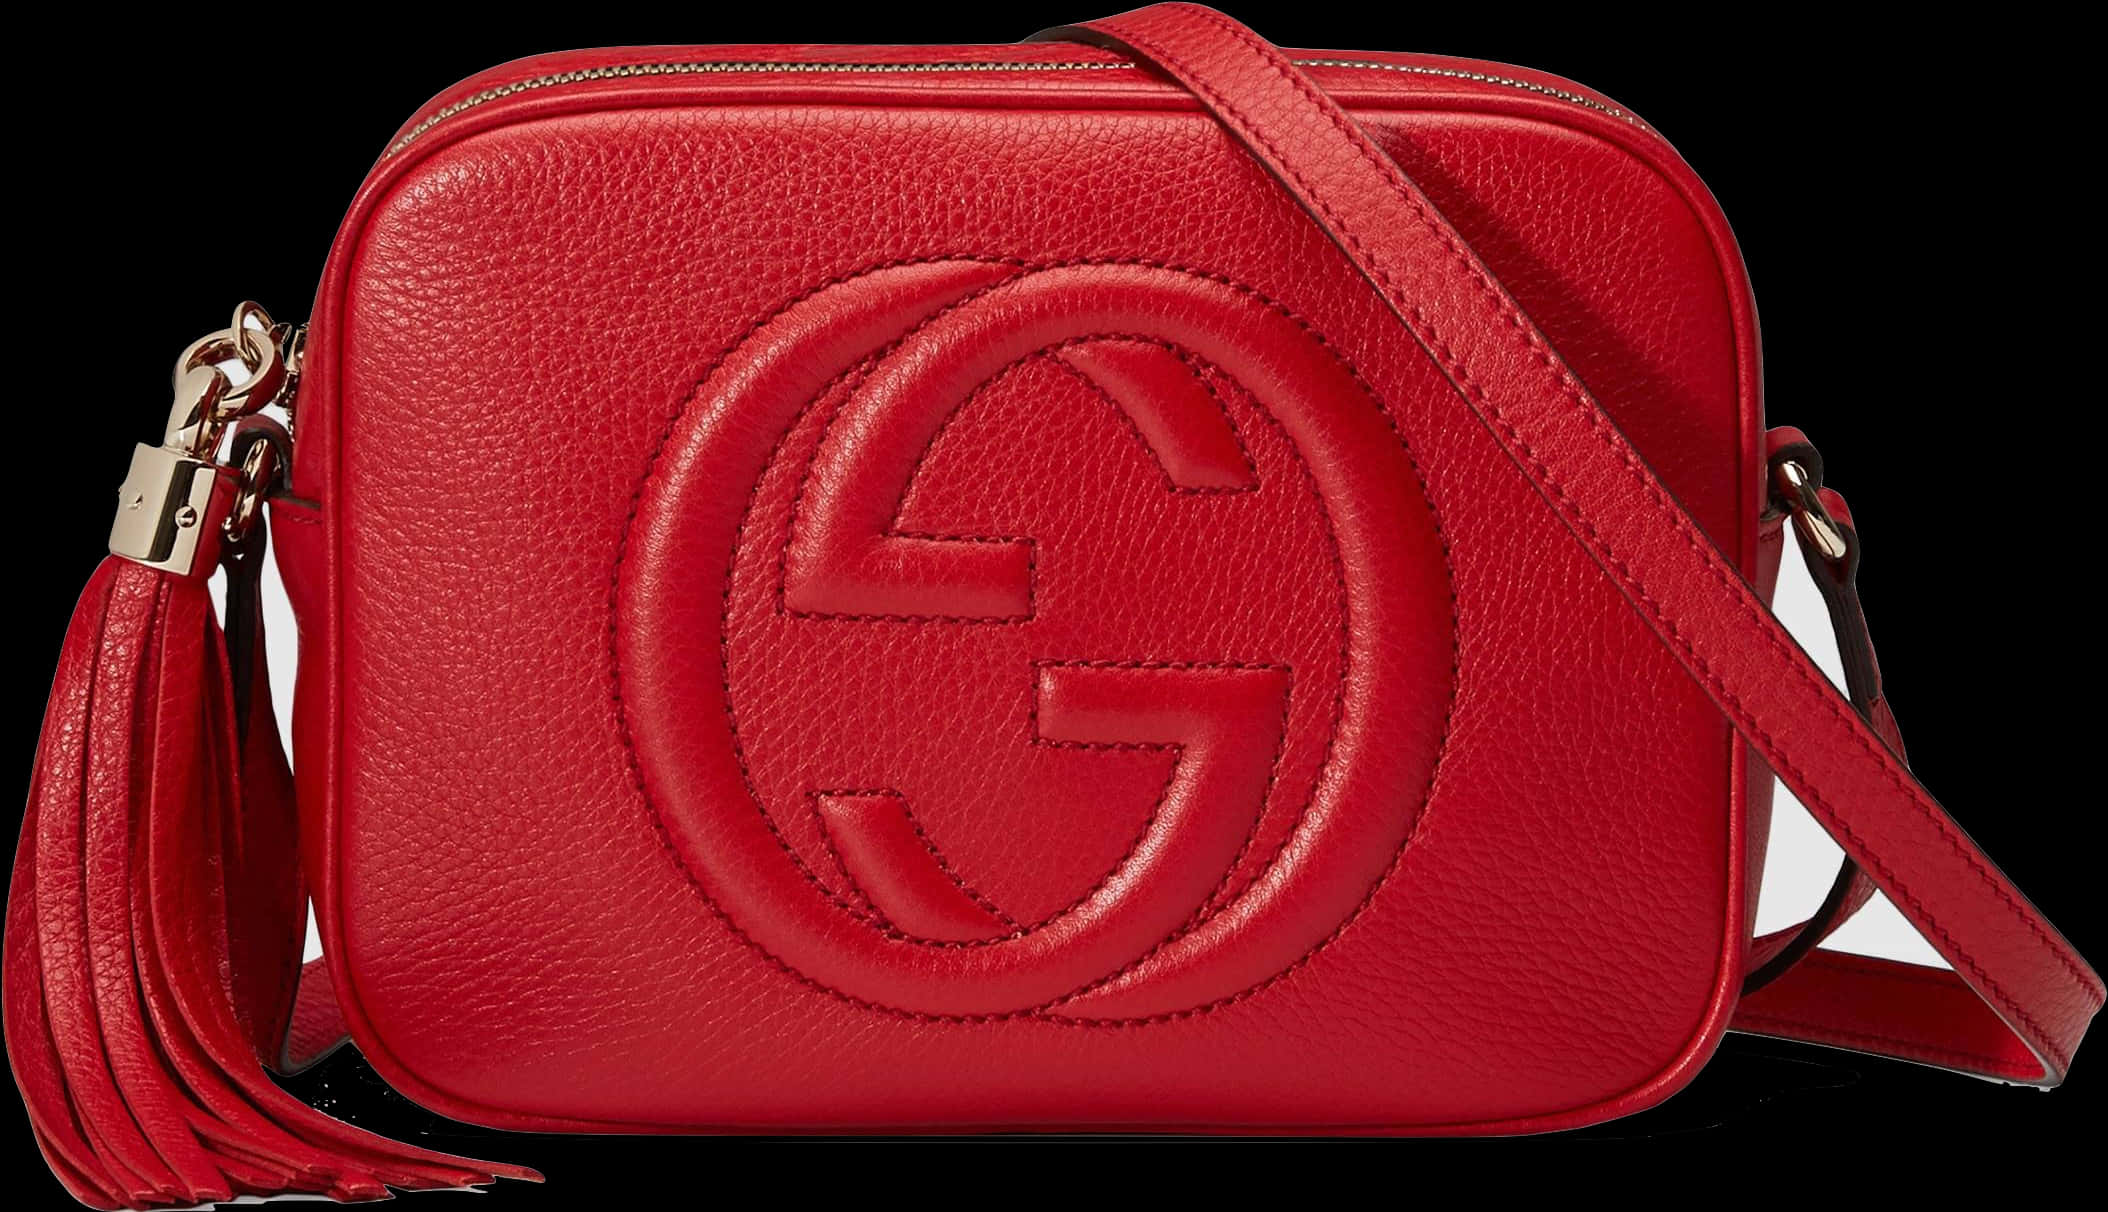 Red Gucci Leather Crossbody Bag PNG